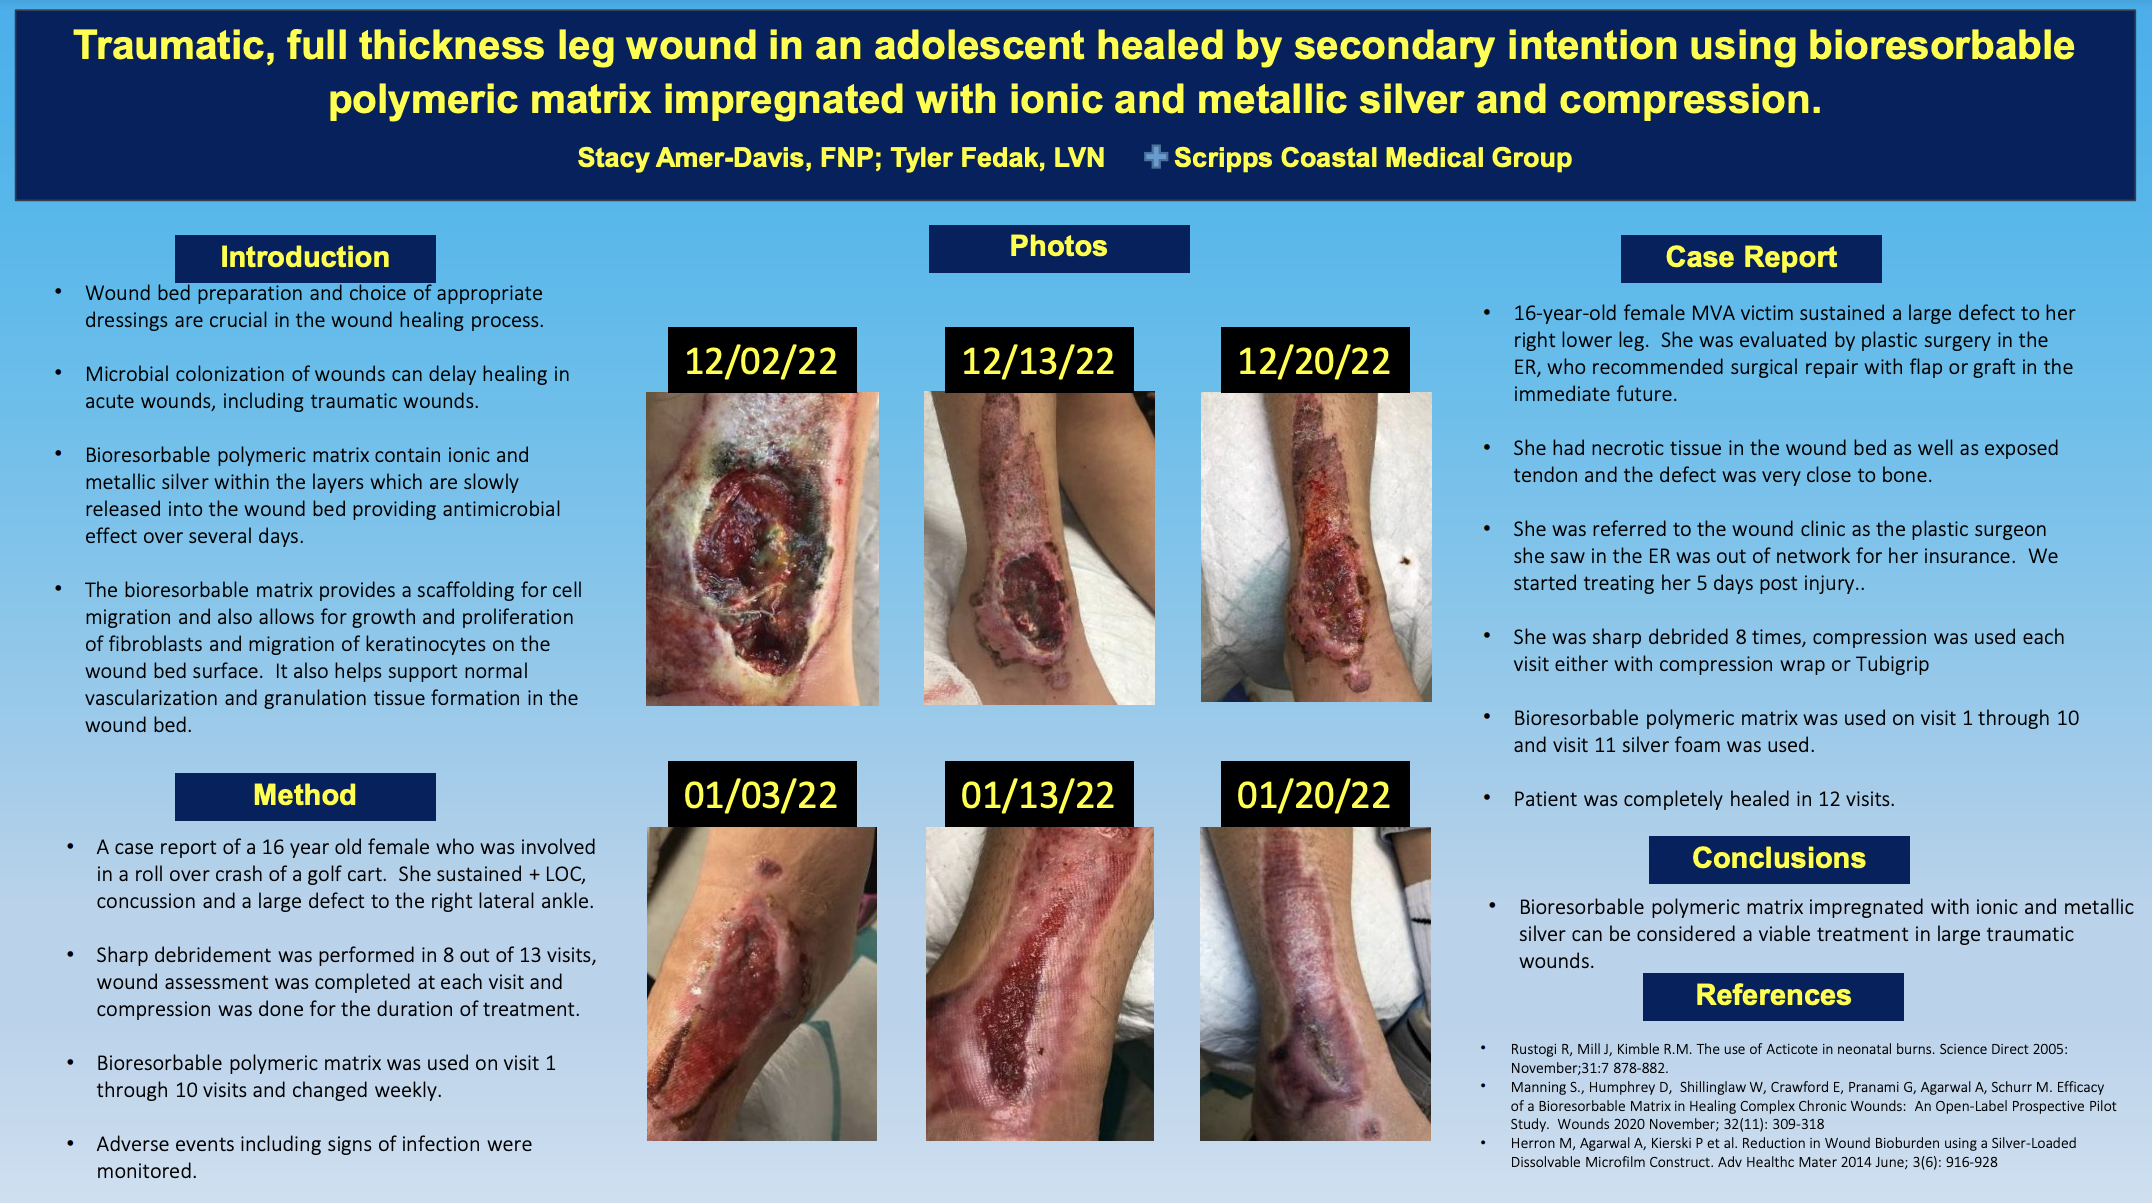 SAWC FALL 2023 Poster: Traumatic, full thickness leg wound in an adolescent healed by secondary intention using bioresorbable polymeric matric impregnated with ionic and metallic silver and compression. 